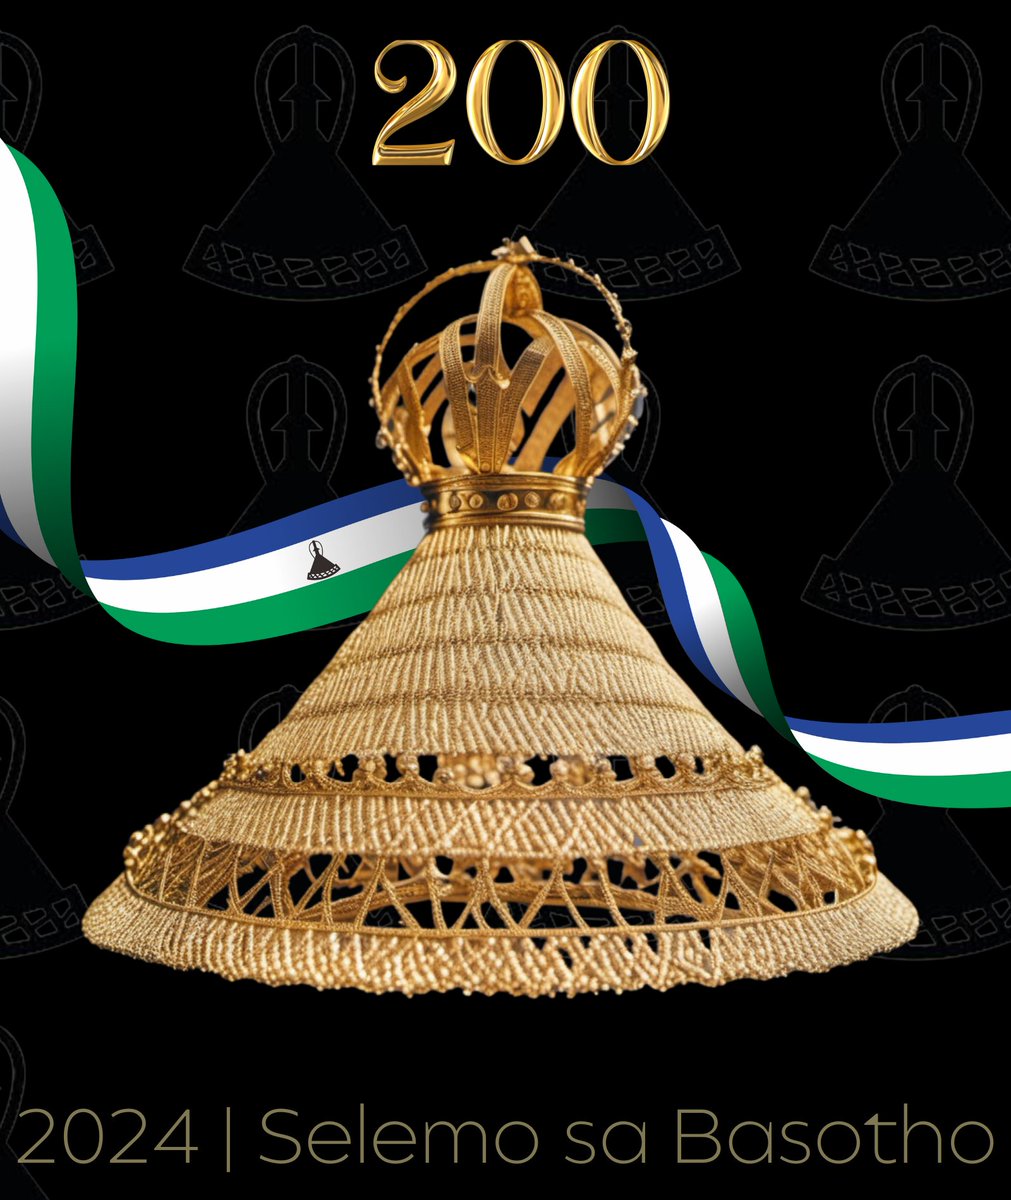 I've had several requests for my permission to use this graphic. Anyone wishing to do so has my consent. I'm delighted to make this my small contribution to celebrating our milestone, hoping this perhaps might also work to inspire us a little! #Lesotho200 #Lesotho #Lstwitter